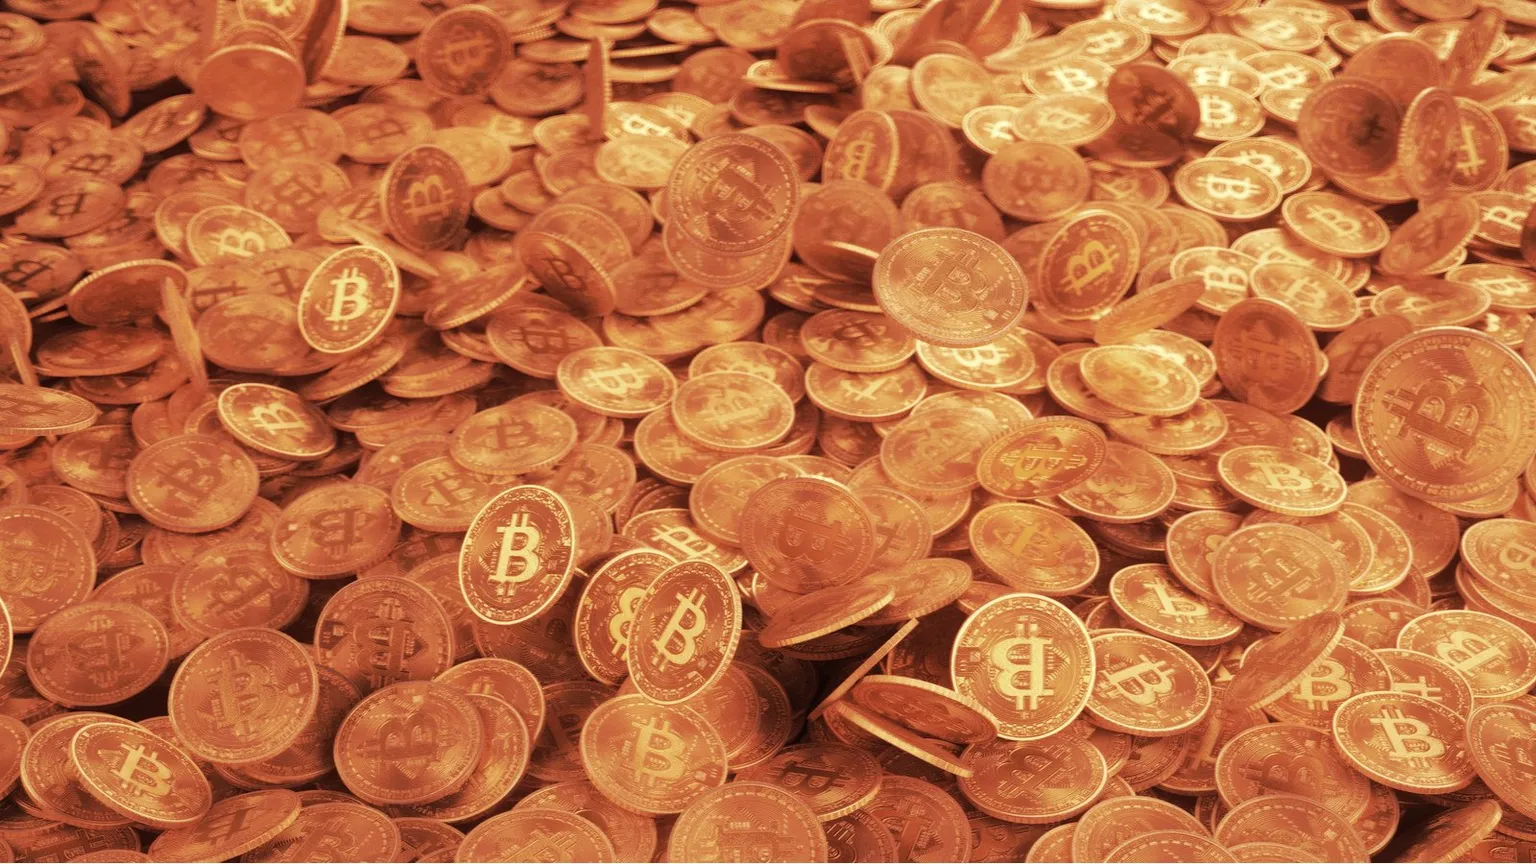 Lots of Bitcoin. Image: Shutterstock